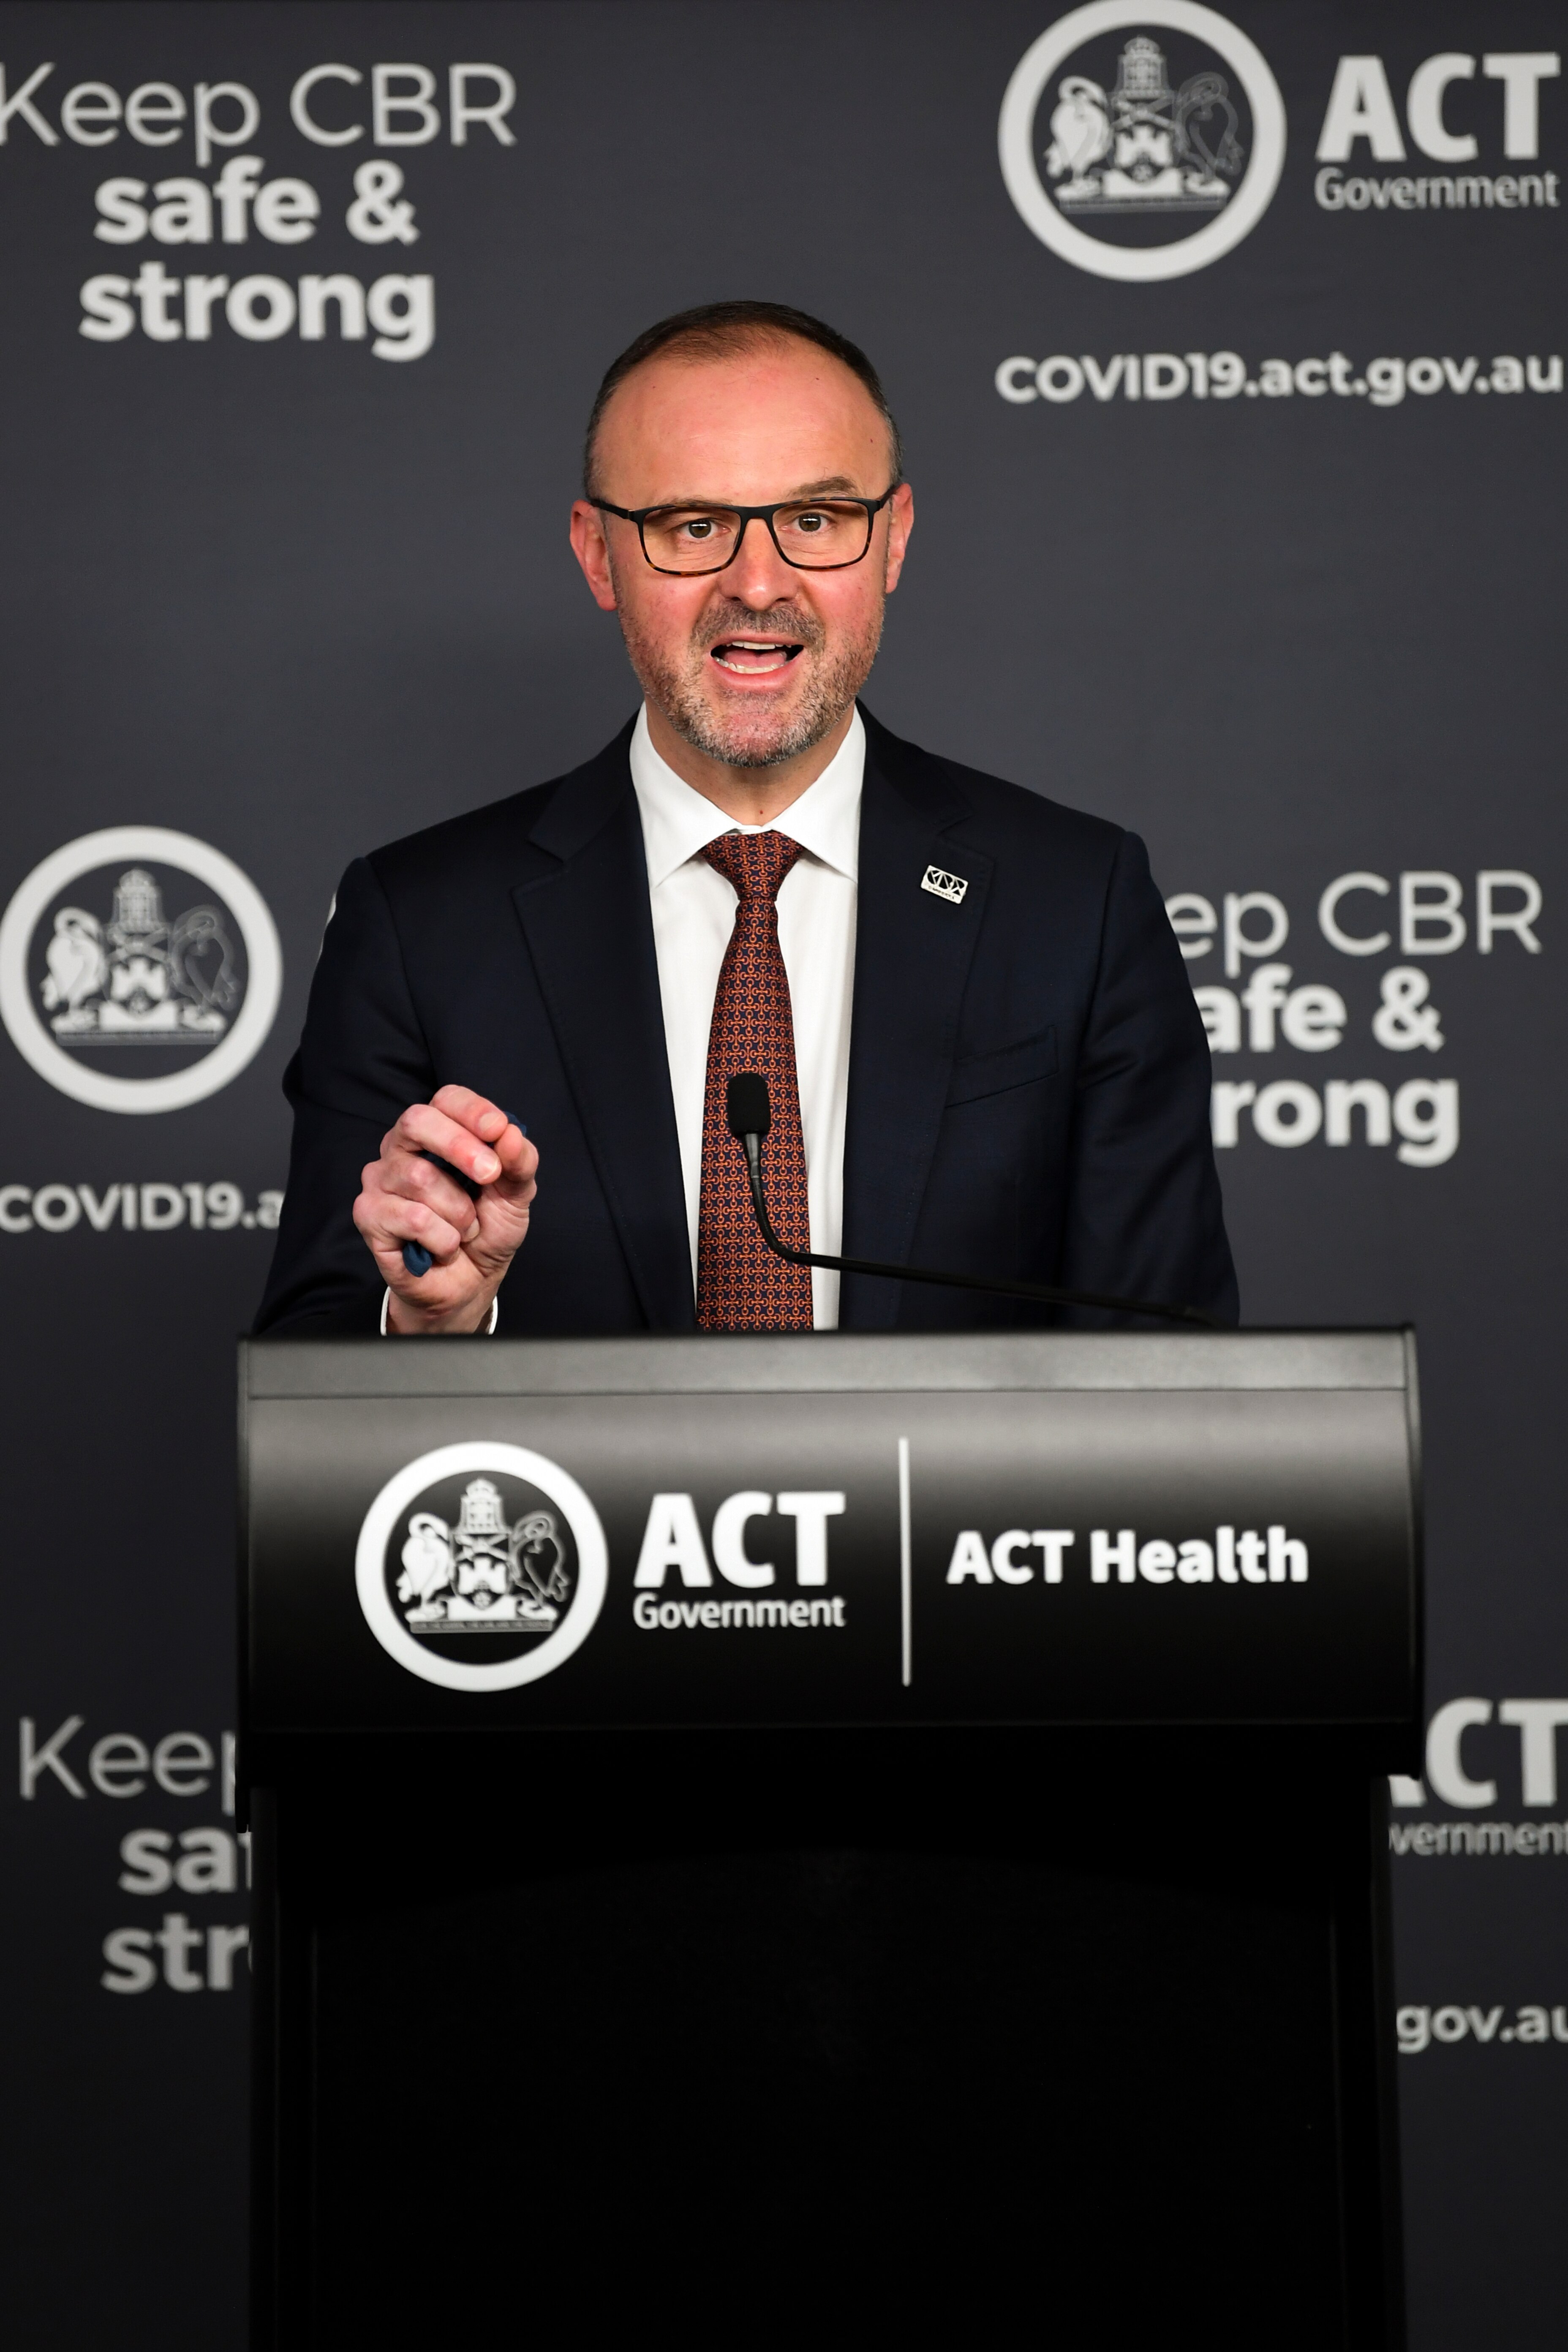 ACT Chief Minister Andrew Barr speaks to the media during a press conference in Canberra, Tuesday, August 17, 2021. (AAP Image/Lukas Coch) NO ARCHIVING